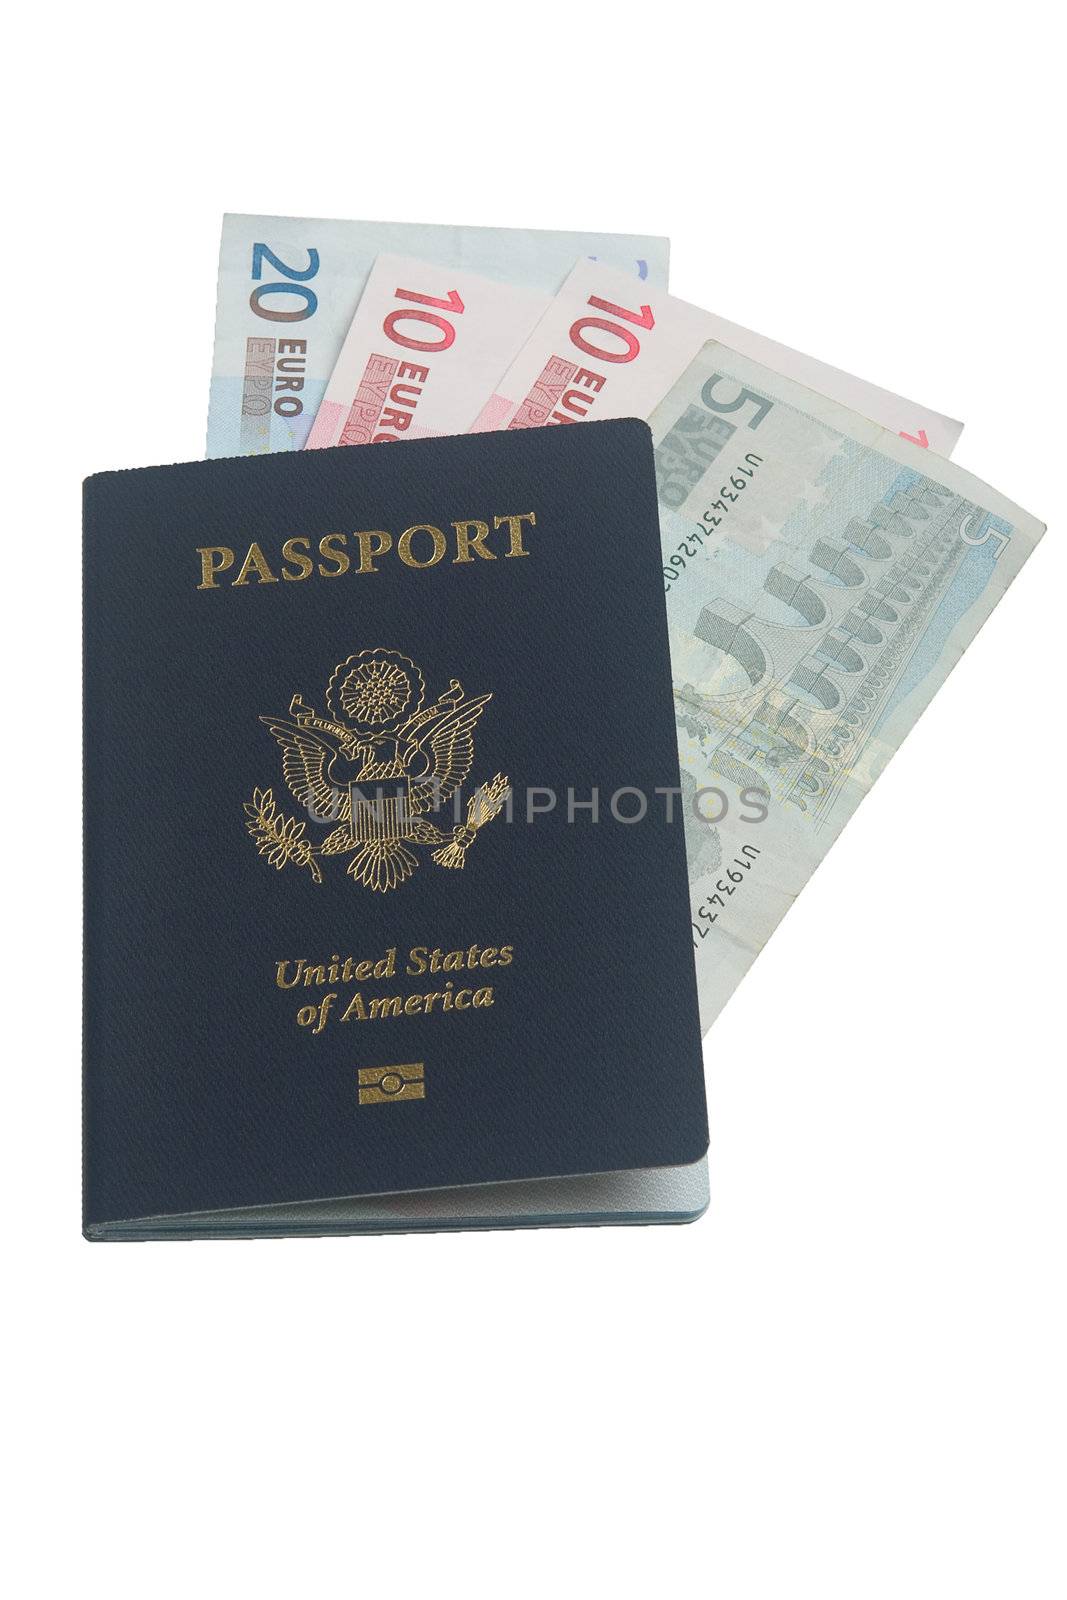 US passport with euros on a white background